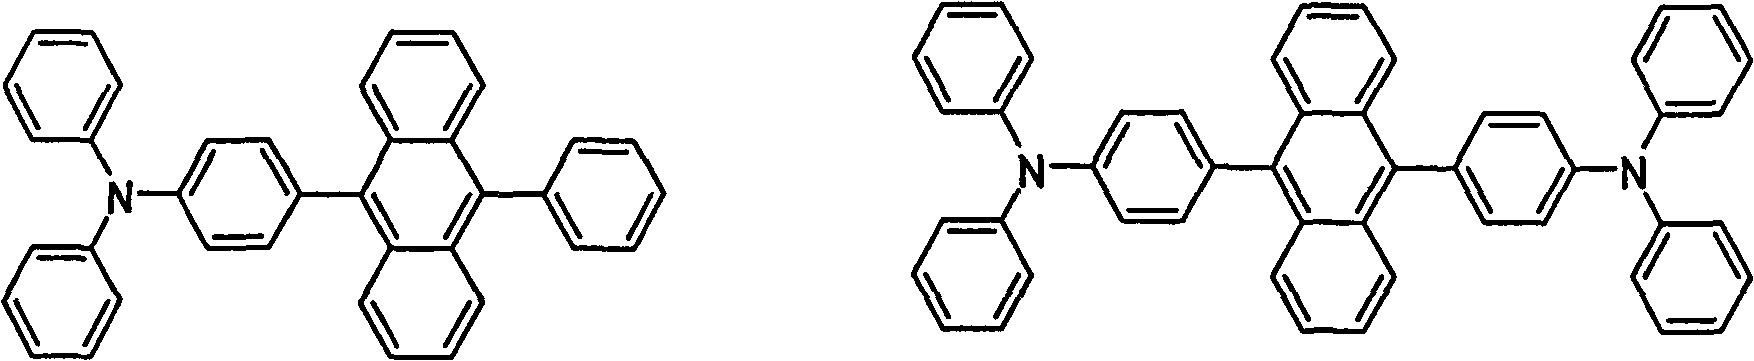 Monoanthracene derivative blue electroluminescent material, preparation and use in electroluminescent device manufacture